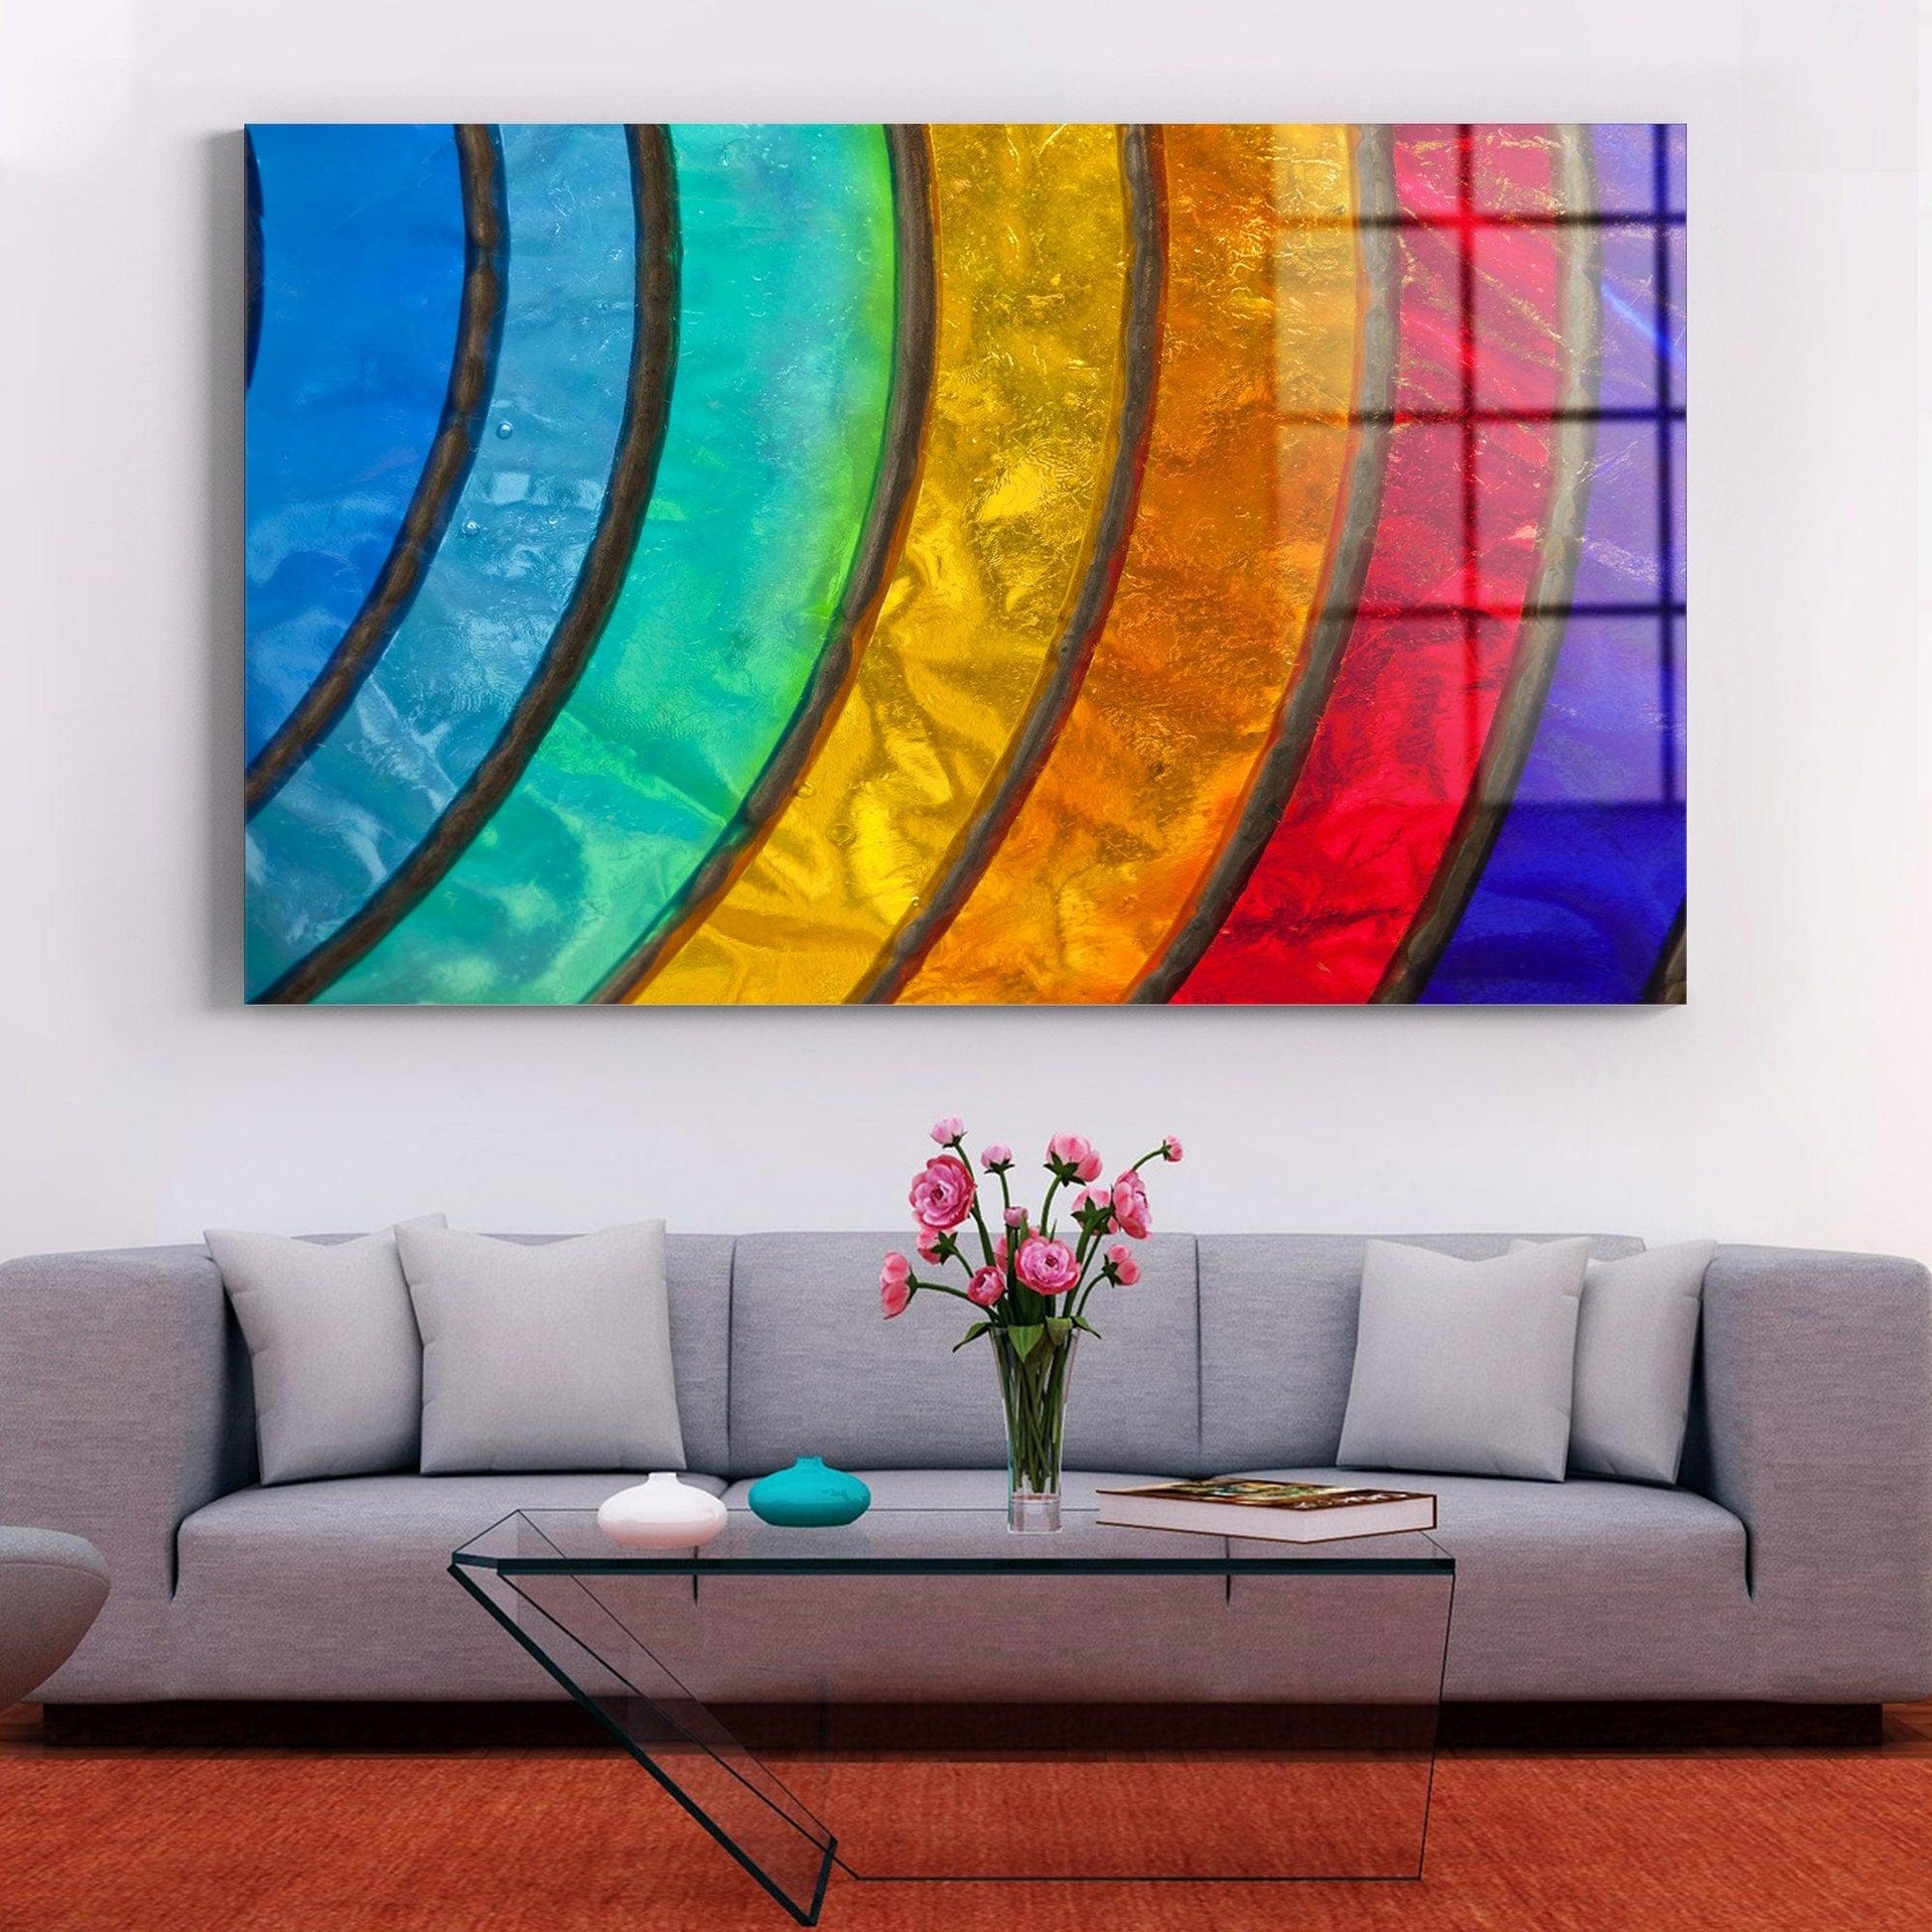 Colored Glasses Wall Art| Colored Glasses Canvas Art, colored Tempered Glass Decor, colored glass art, abstract wall art, rainbow wall art